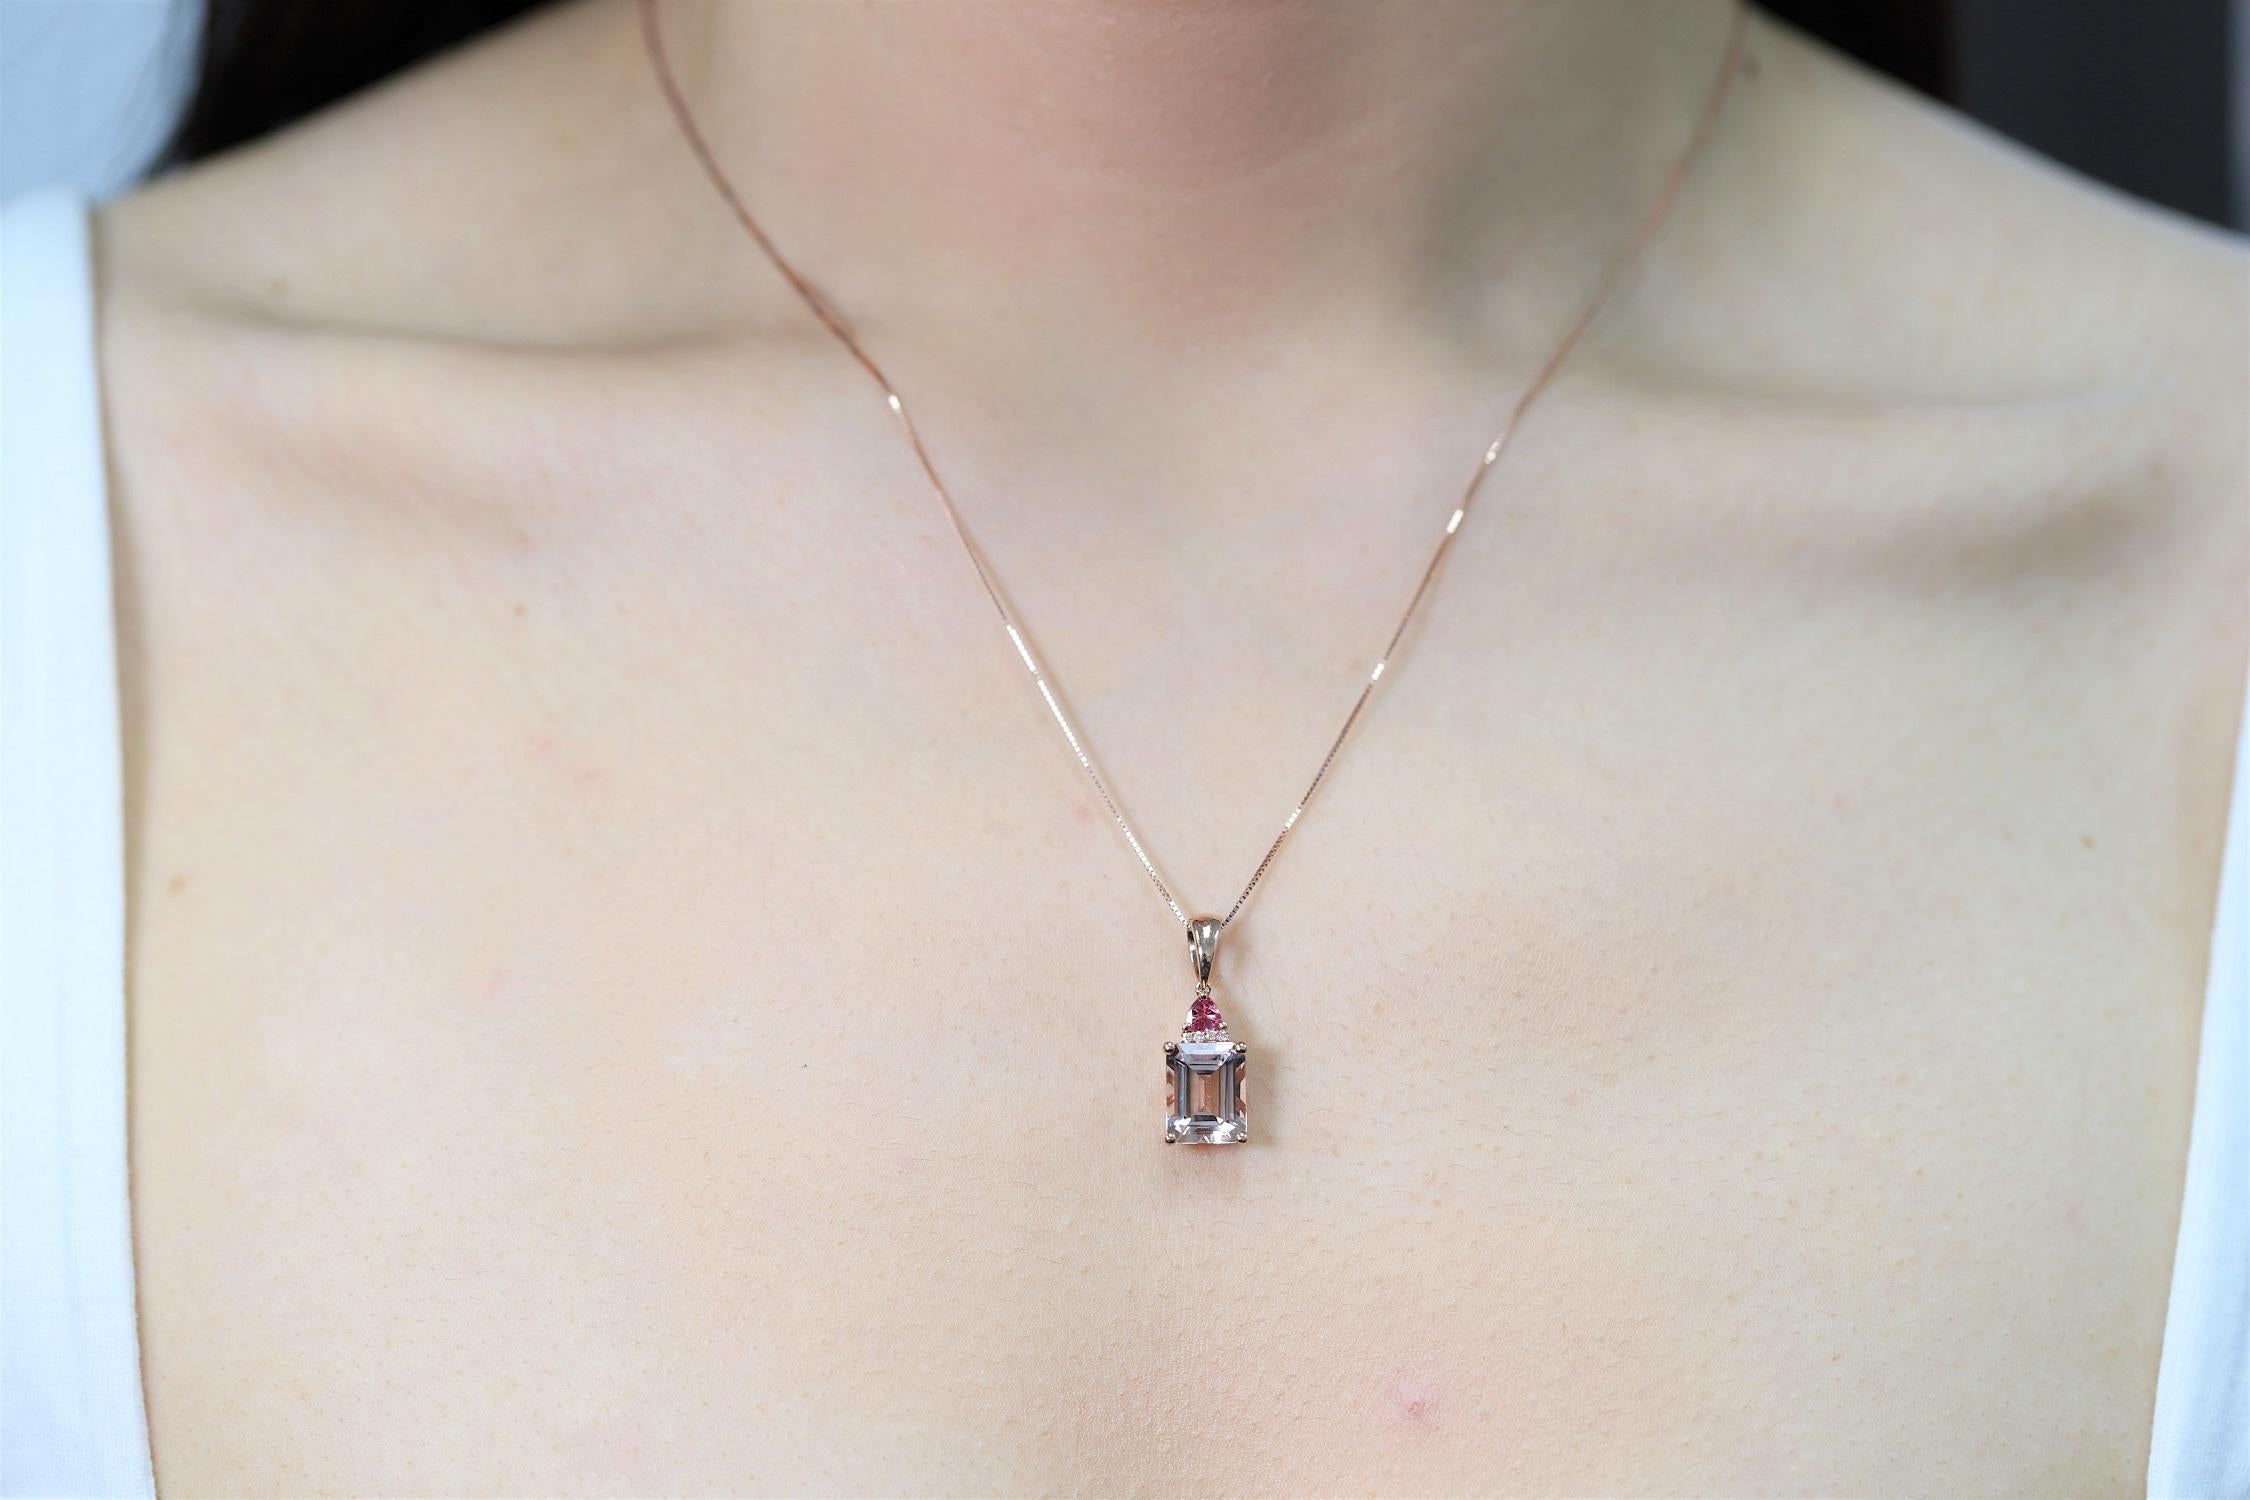 An emerald-cut Genuine morganite gemstone is placed at the bottom of this pendant for sparkle and color. The 14k rose gold necklace is polished and features a secure spring ring clasp. Details 1 prong-set emerald-cut Genuine morganite each measure 8